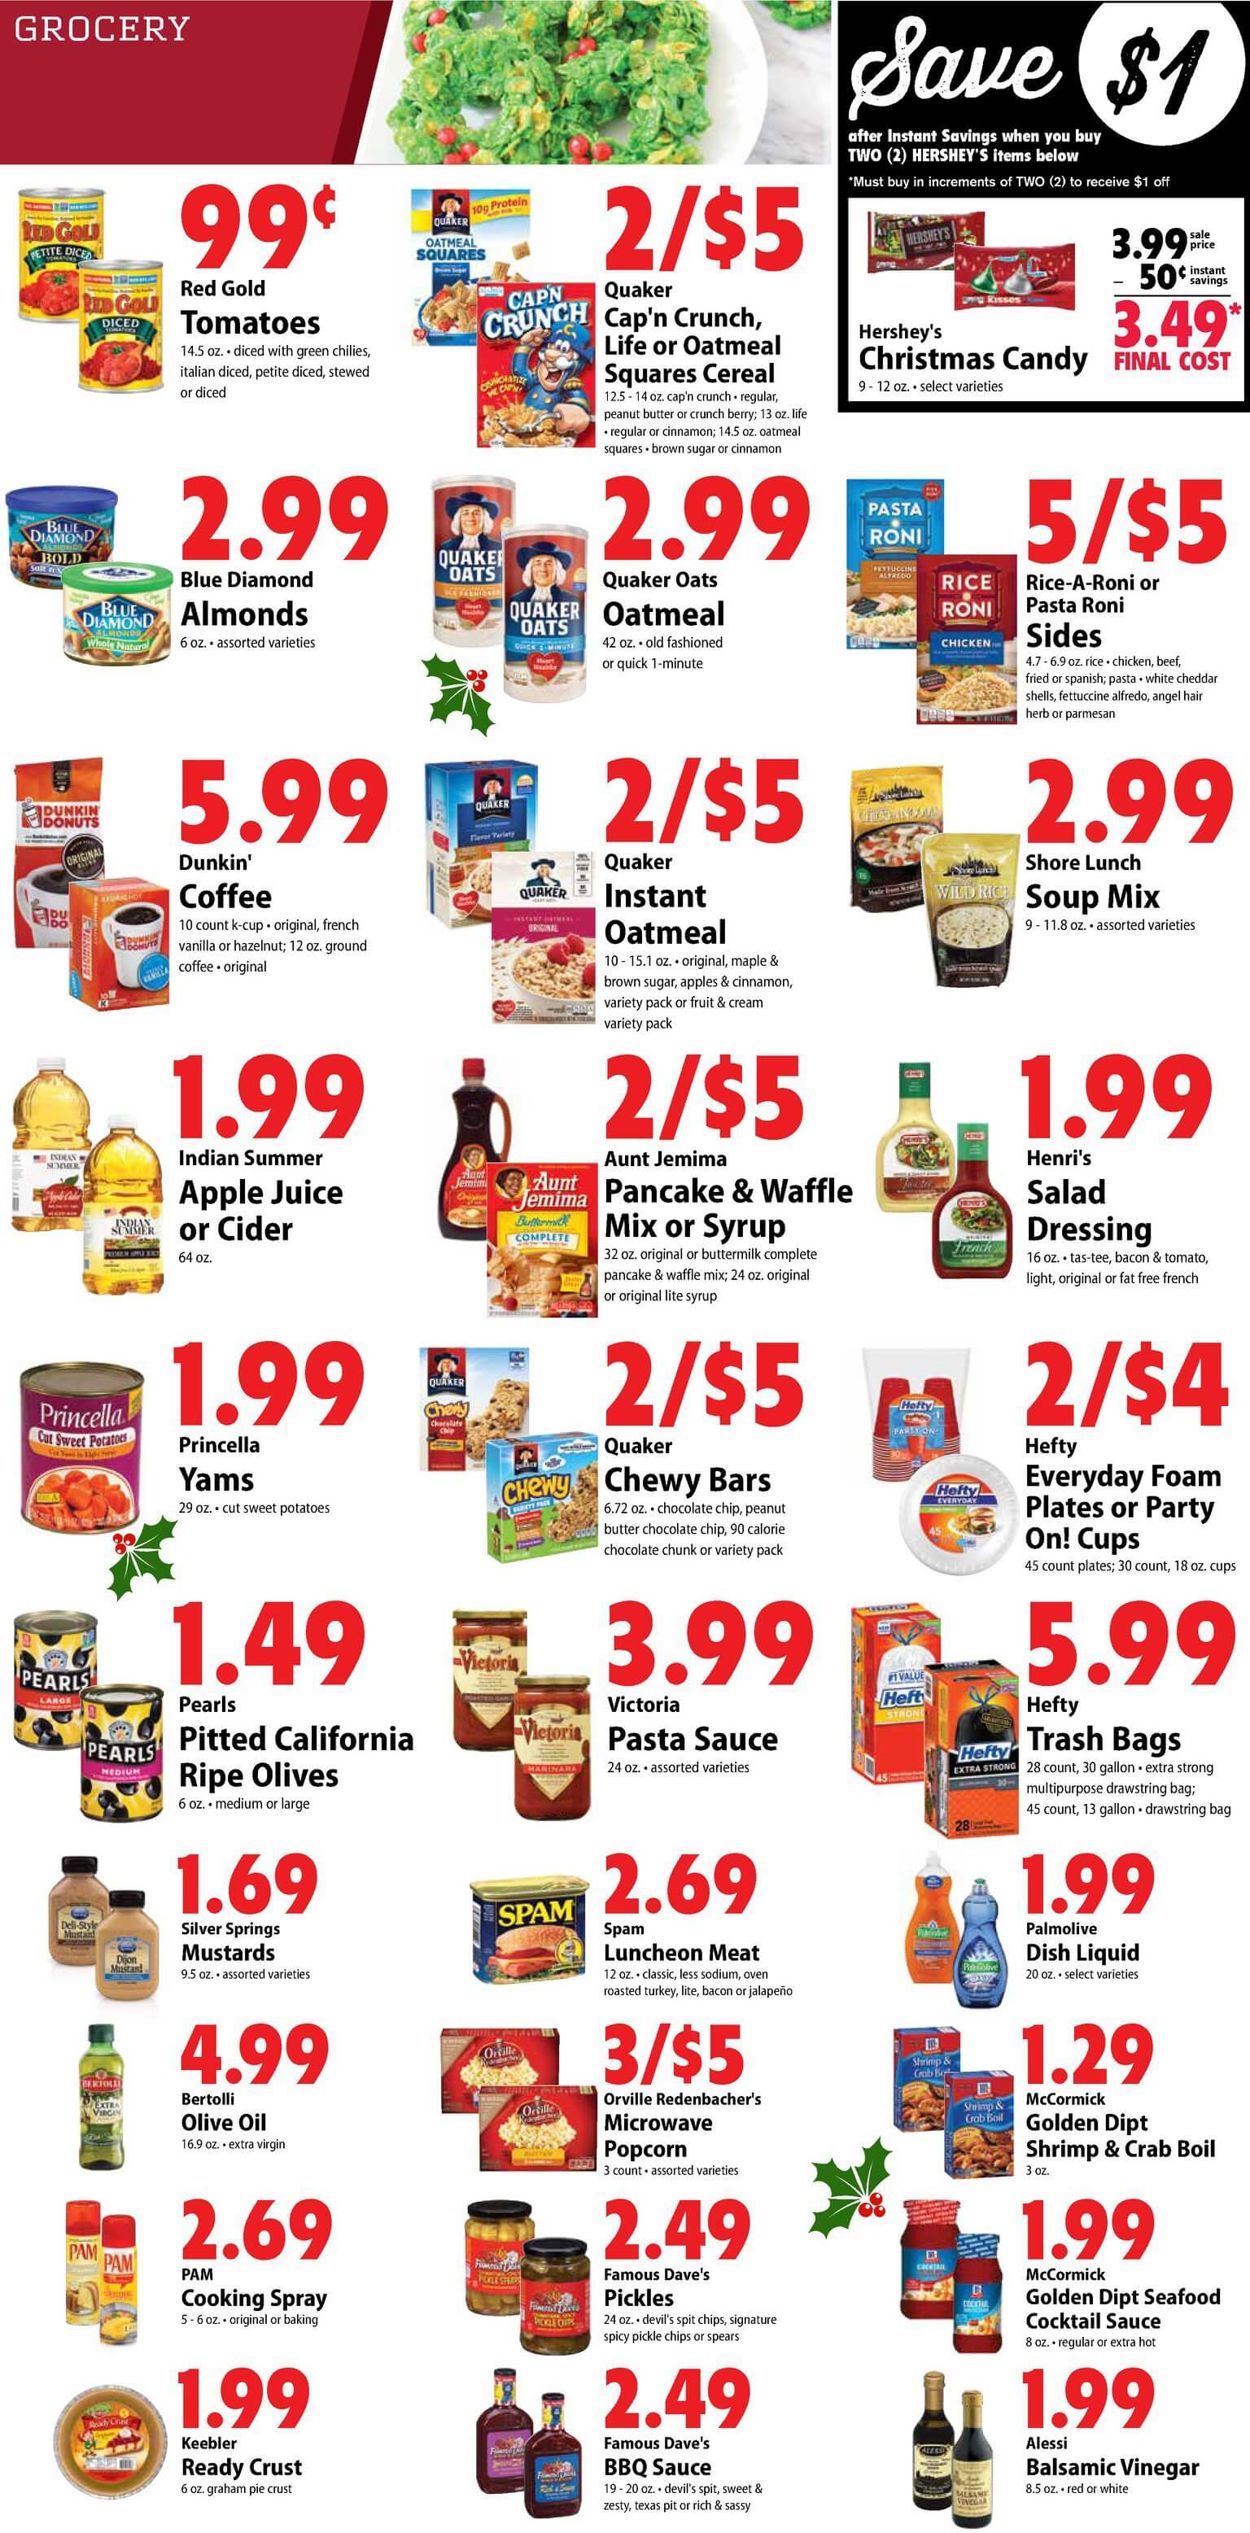 Festival Foods - Christmas Ad 2019 Weekly Ad Circular - valid 12/11-12/17/2019 (Page 6)